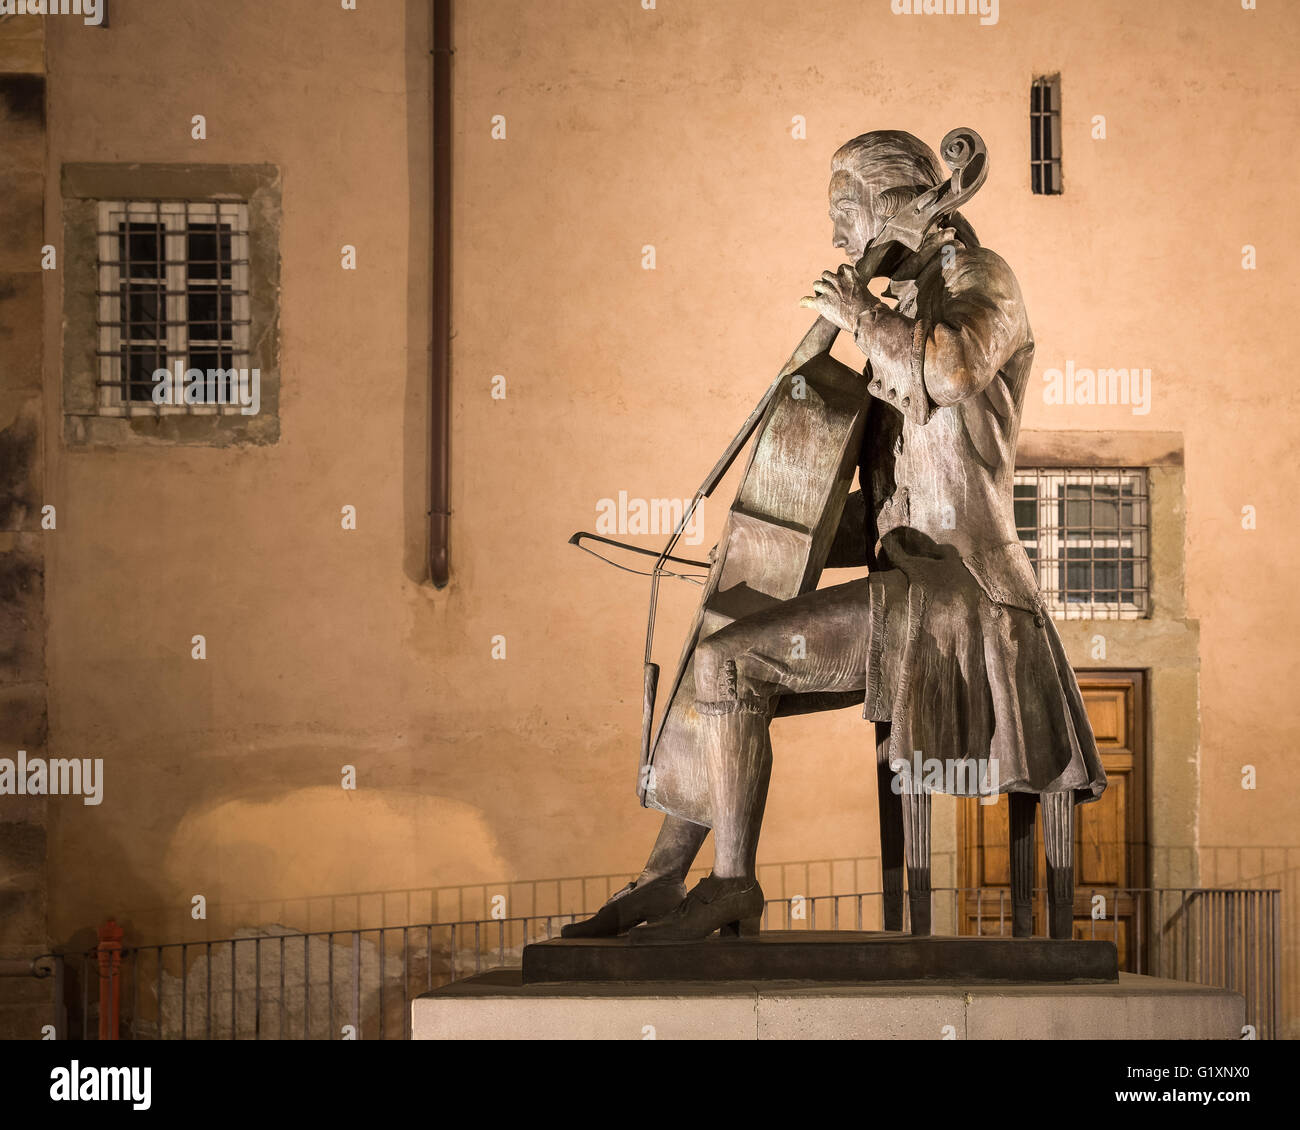 Statue of Luigi Boccherini, a famous Italian classical era composer and cellist from the Tuscan village of Lucca, Italy. Stock Photo